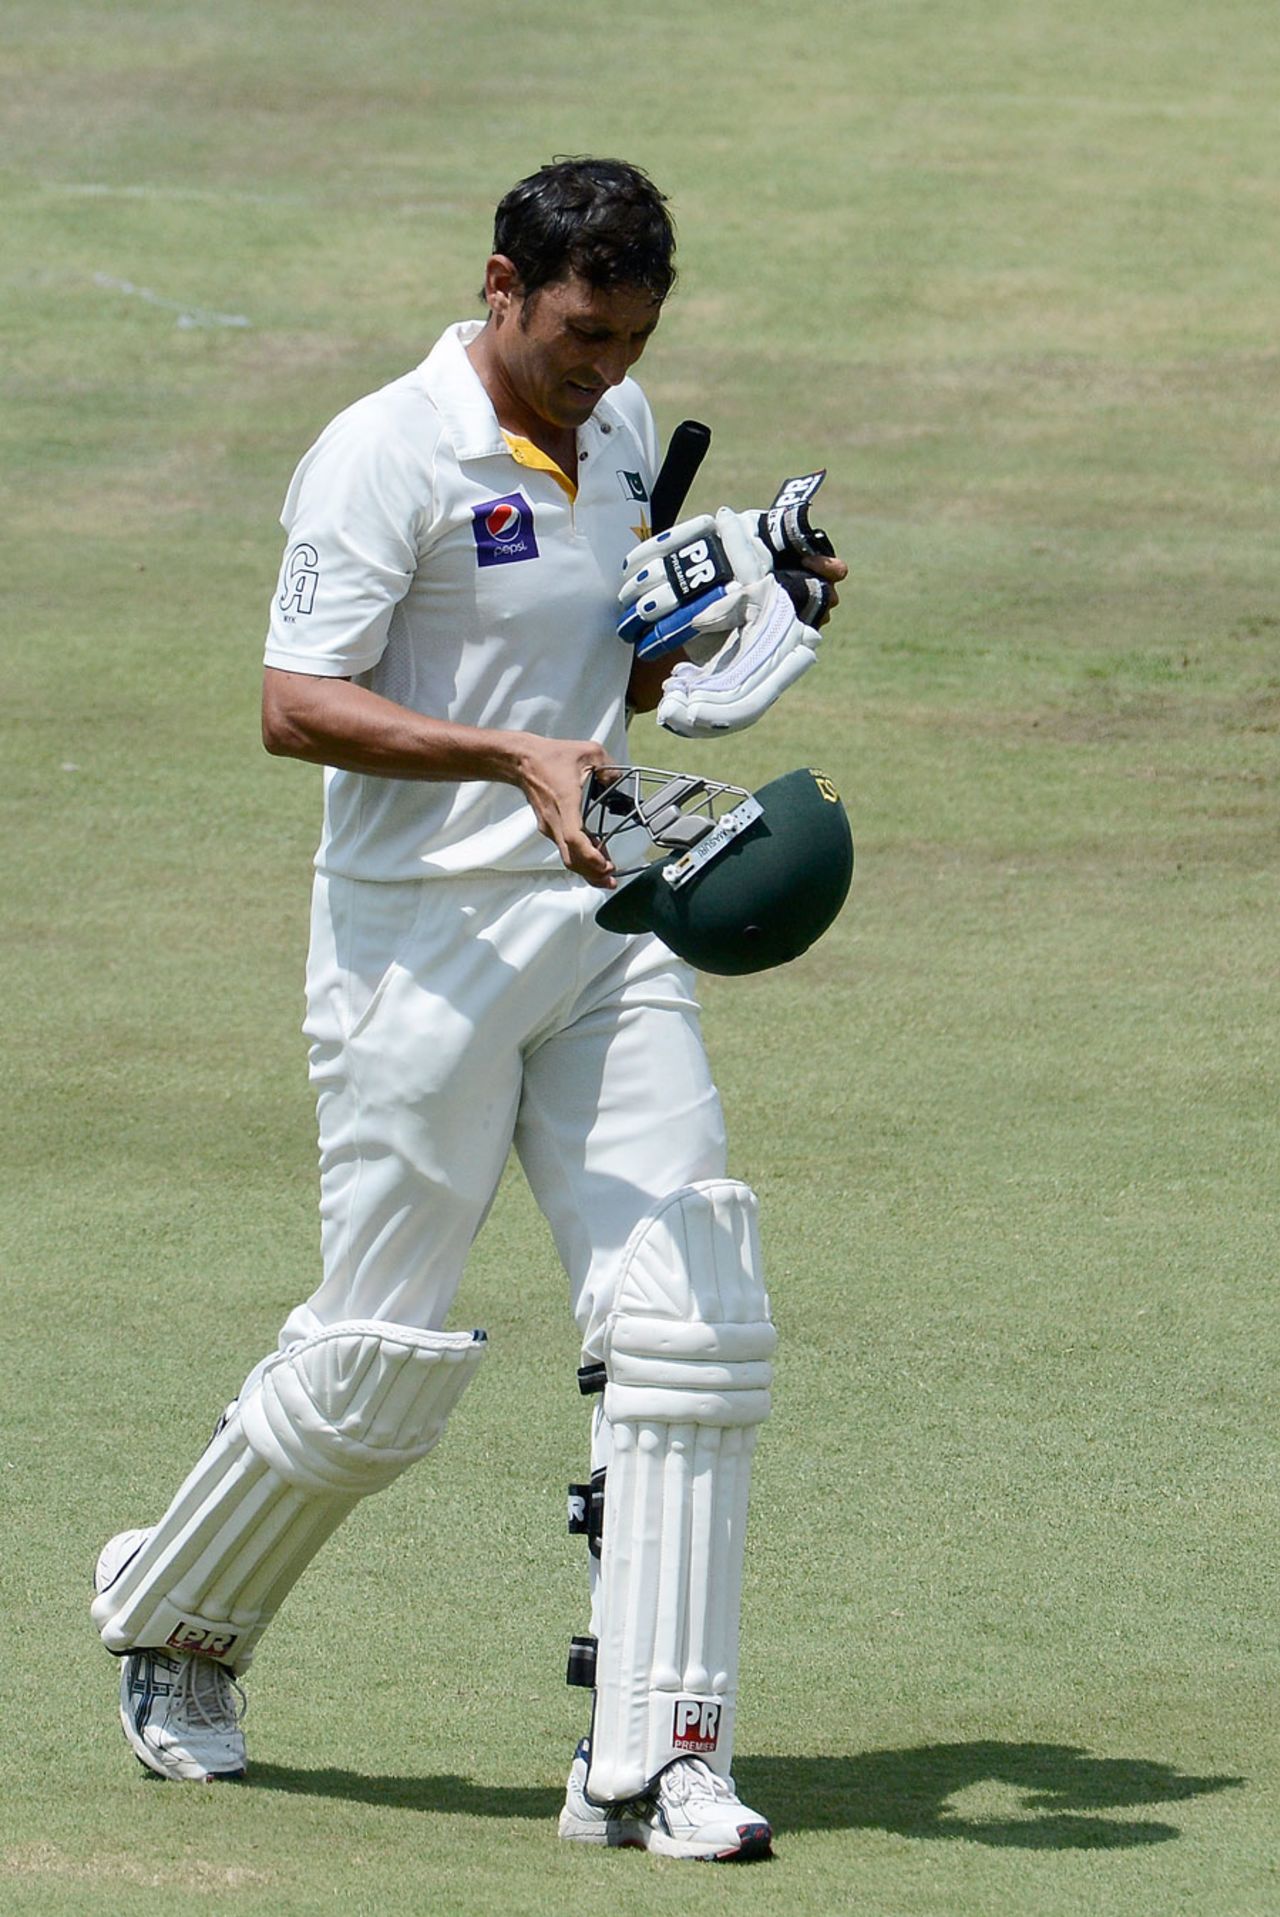 Younis Khan walks back after being dismissed by Dale Steyn, South Africa v Pakistan, 3rd Test, Centurion, 3rd day, February 24, 2013